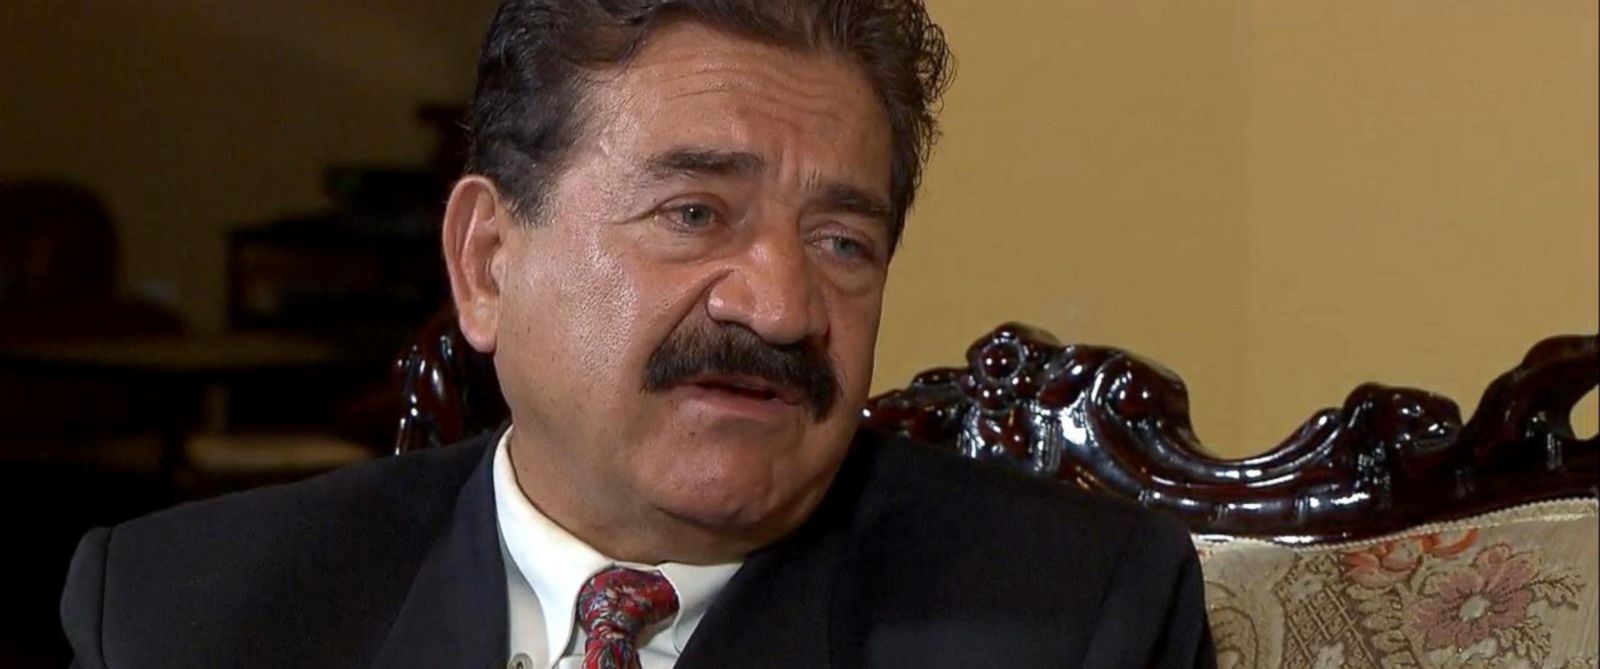 Father of Orlando Shooting Suspect: ‘I Don’t Think He Was Radicalized’